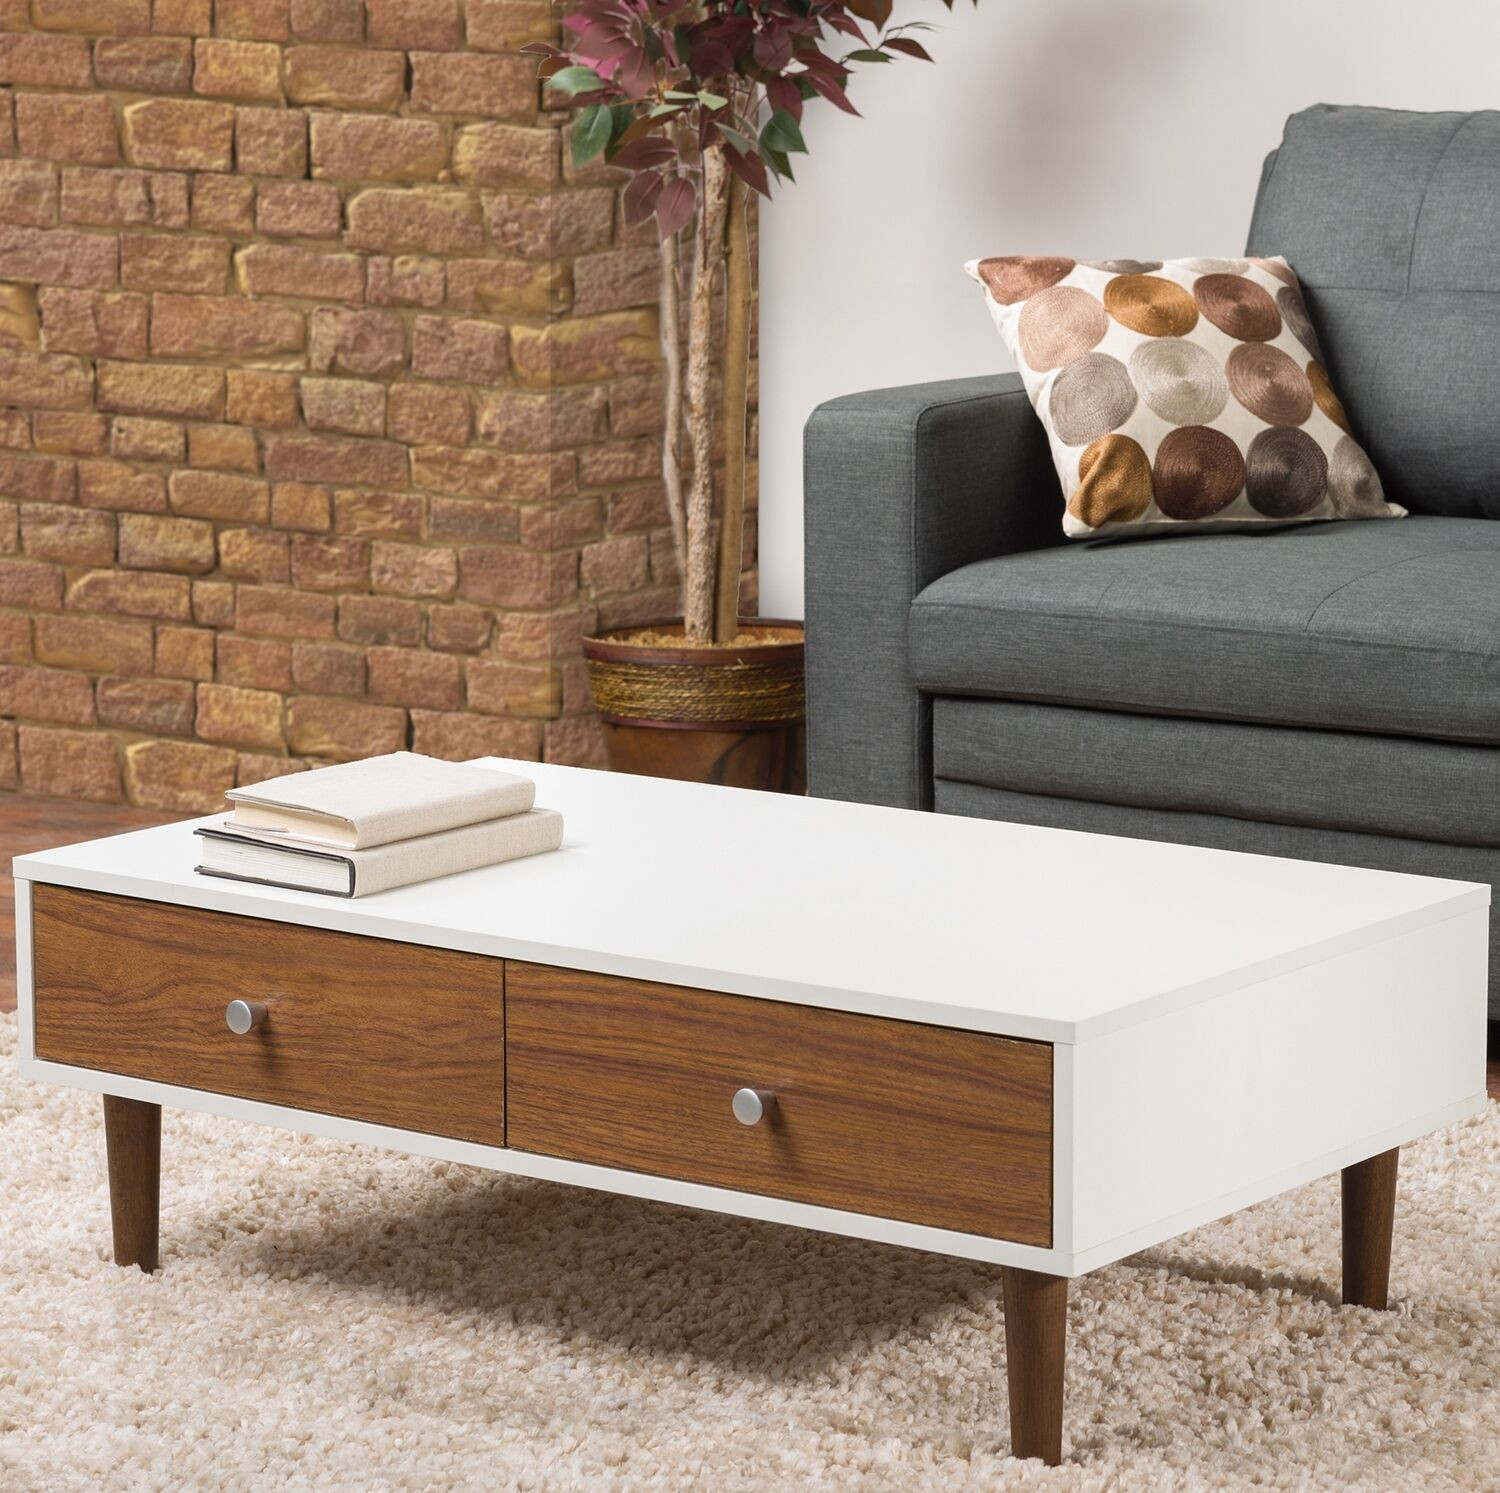 White Living Room End Tables
 White Coffee Table Storage Drawer Modern Wood Furniture